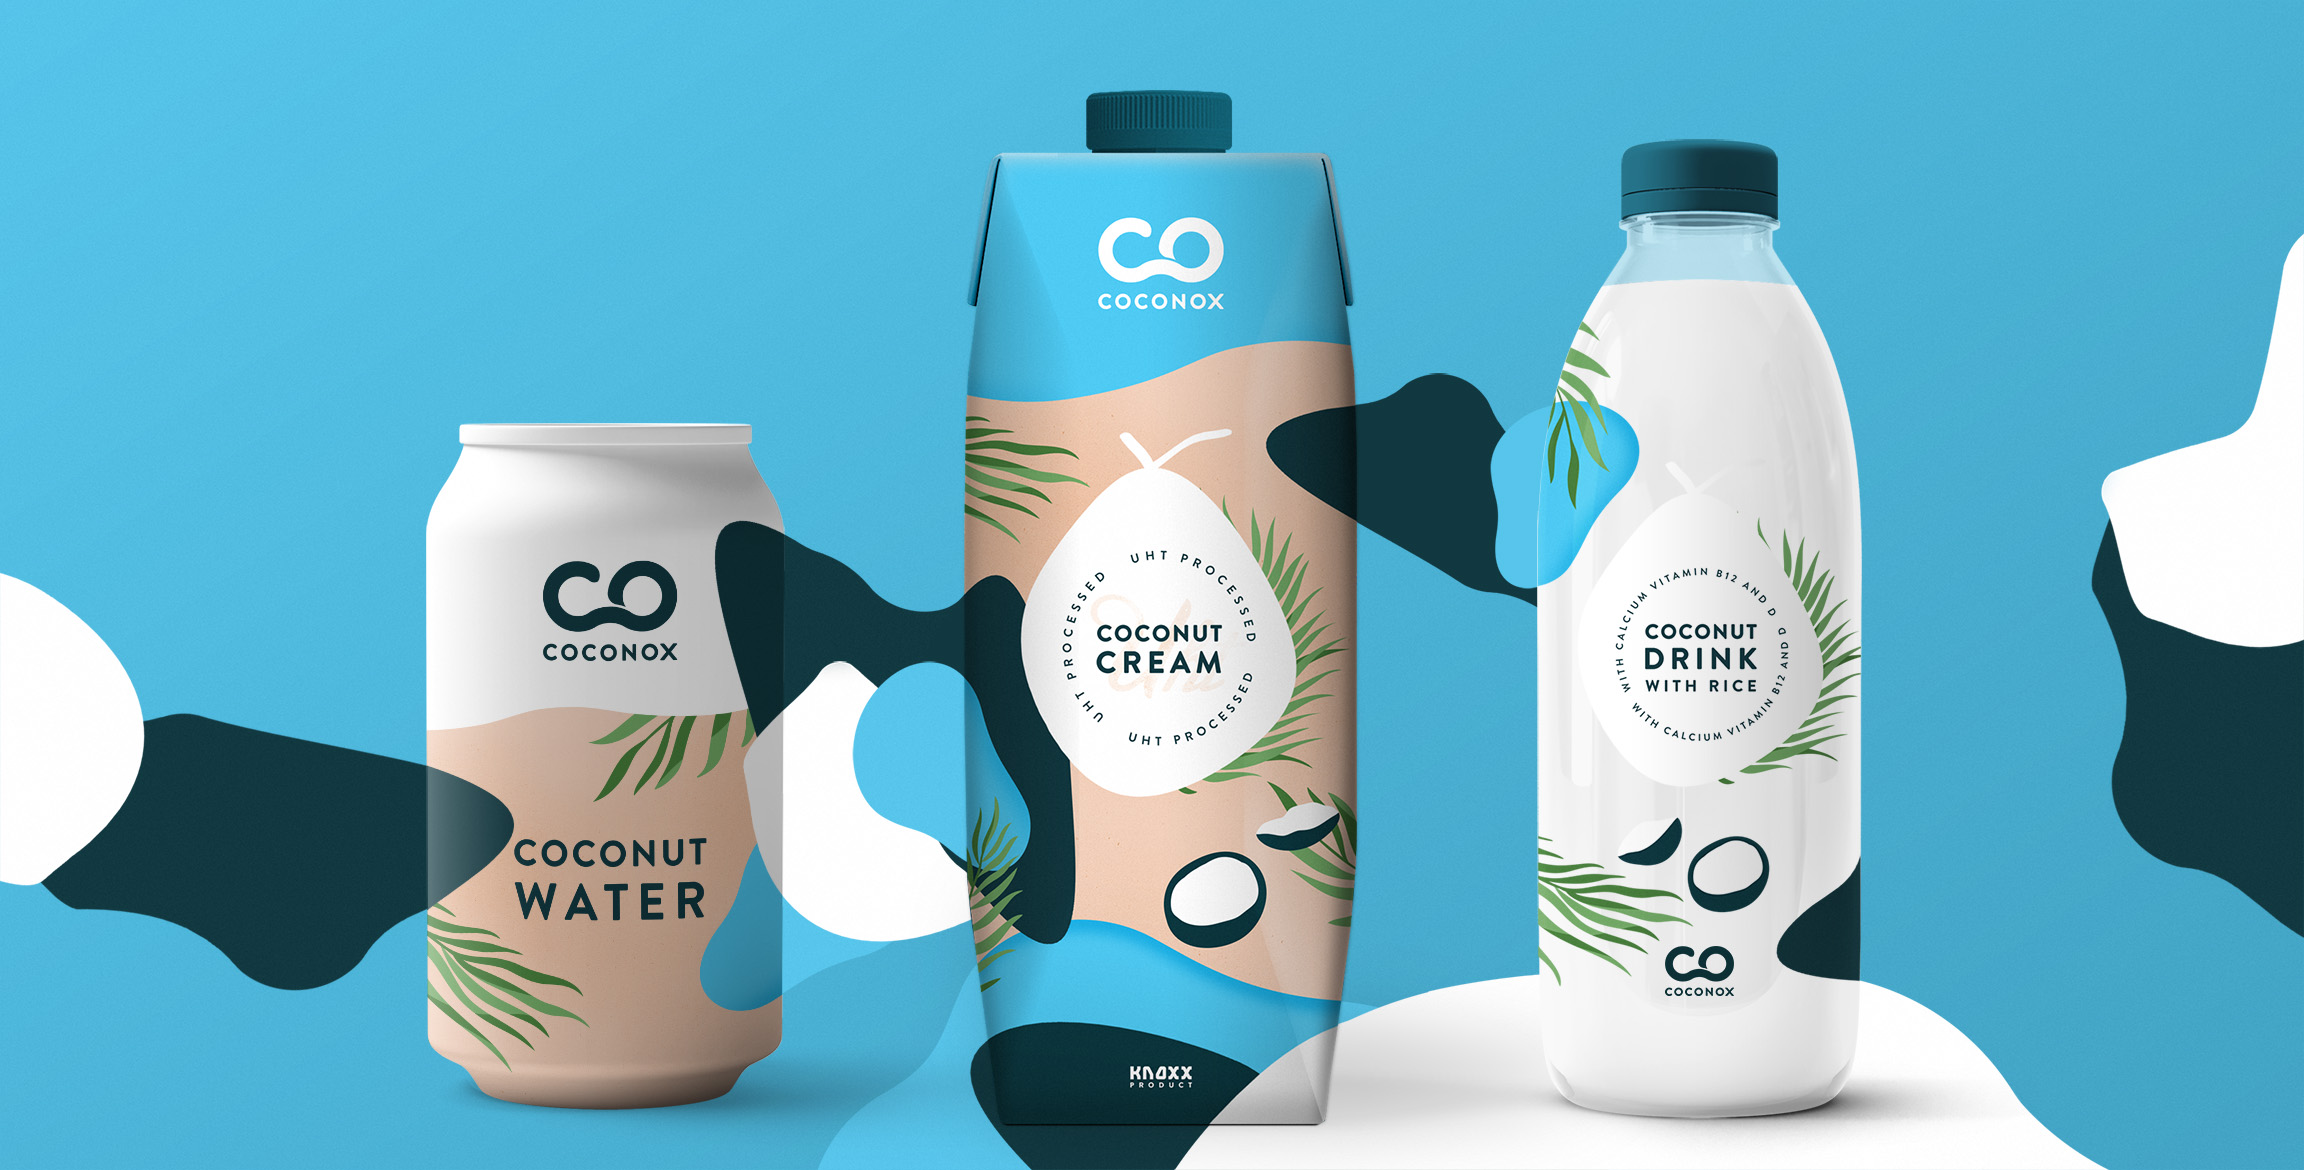 None Branding Agency Create Brand and Packaging Design for Coconut